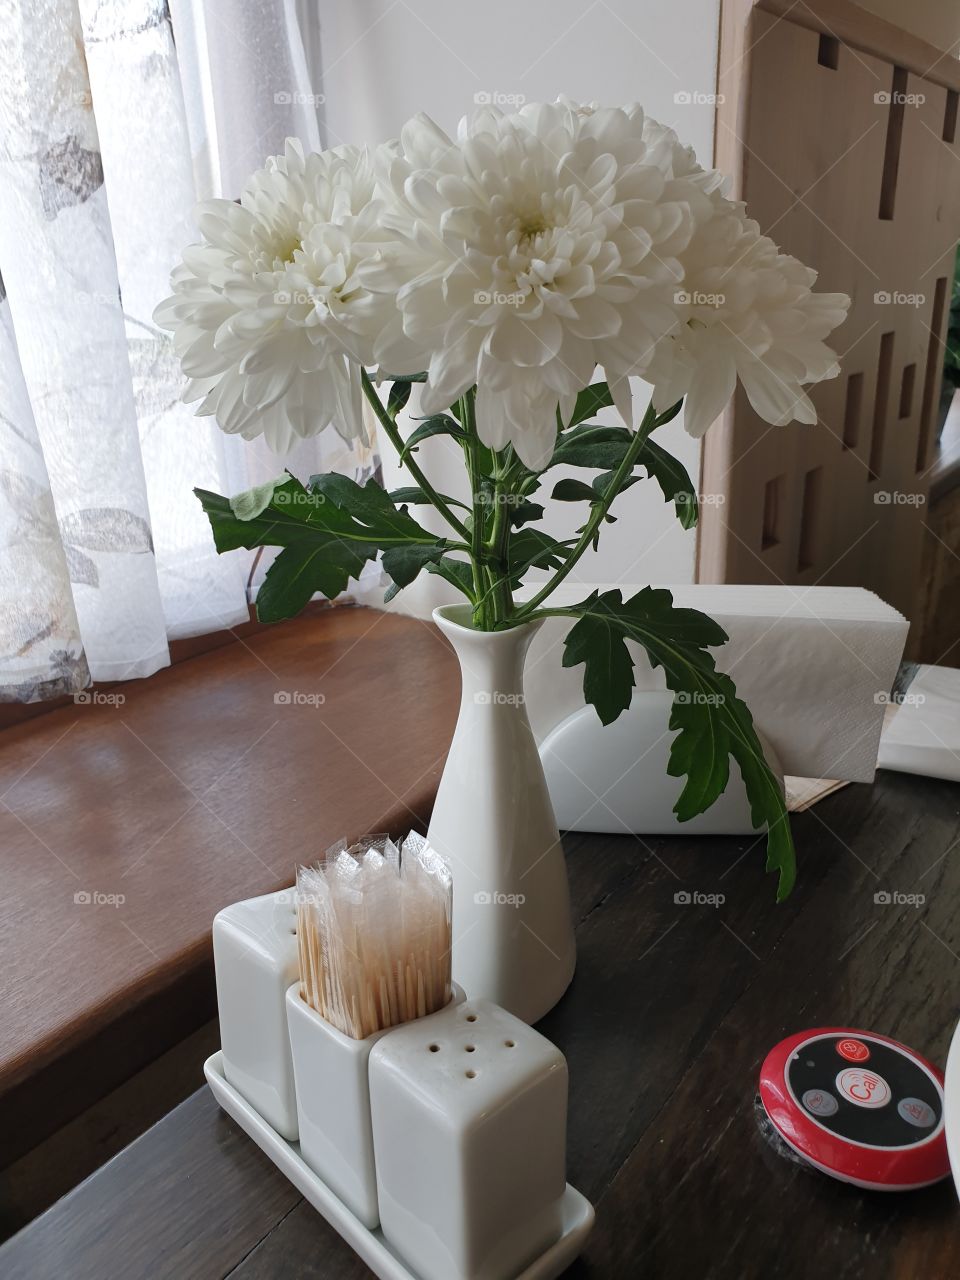 Whote flowers on a cafe table